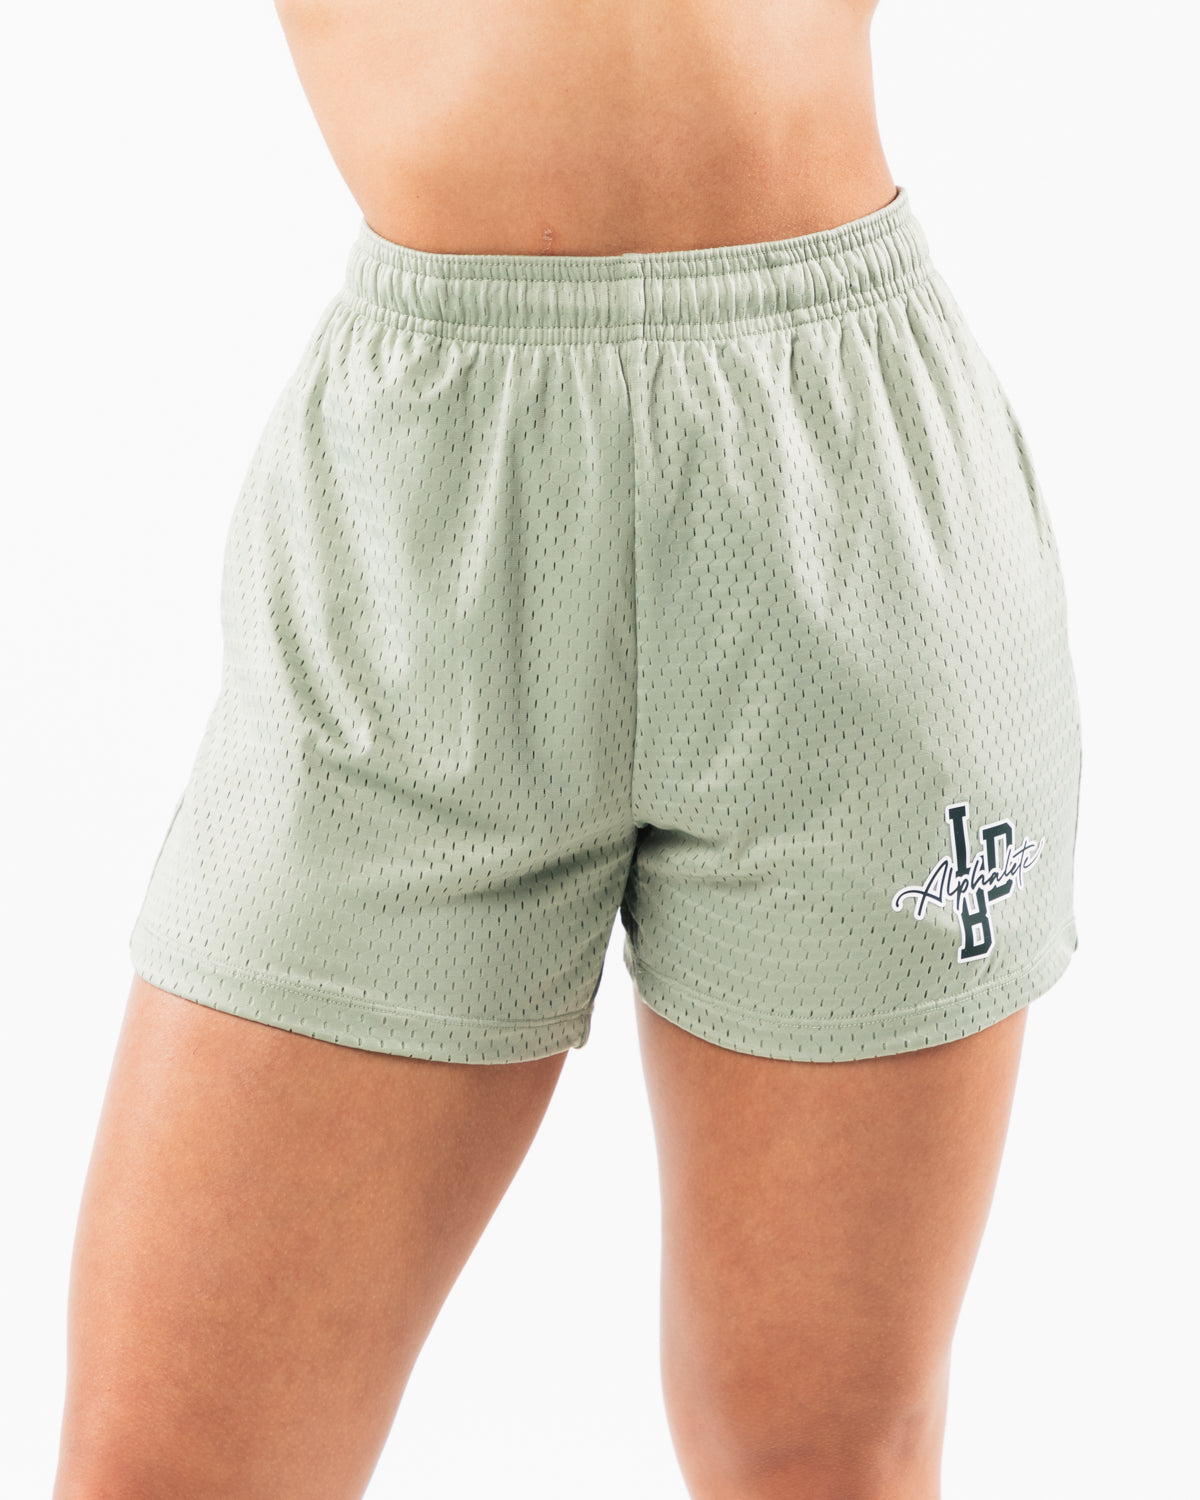 GeeGee Plus Size Zeometric Printed Athletic Shorts - Sage & Willow